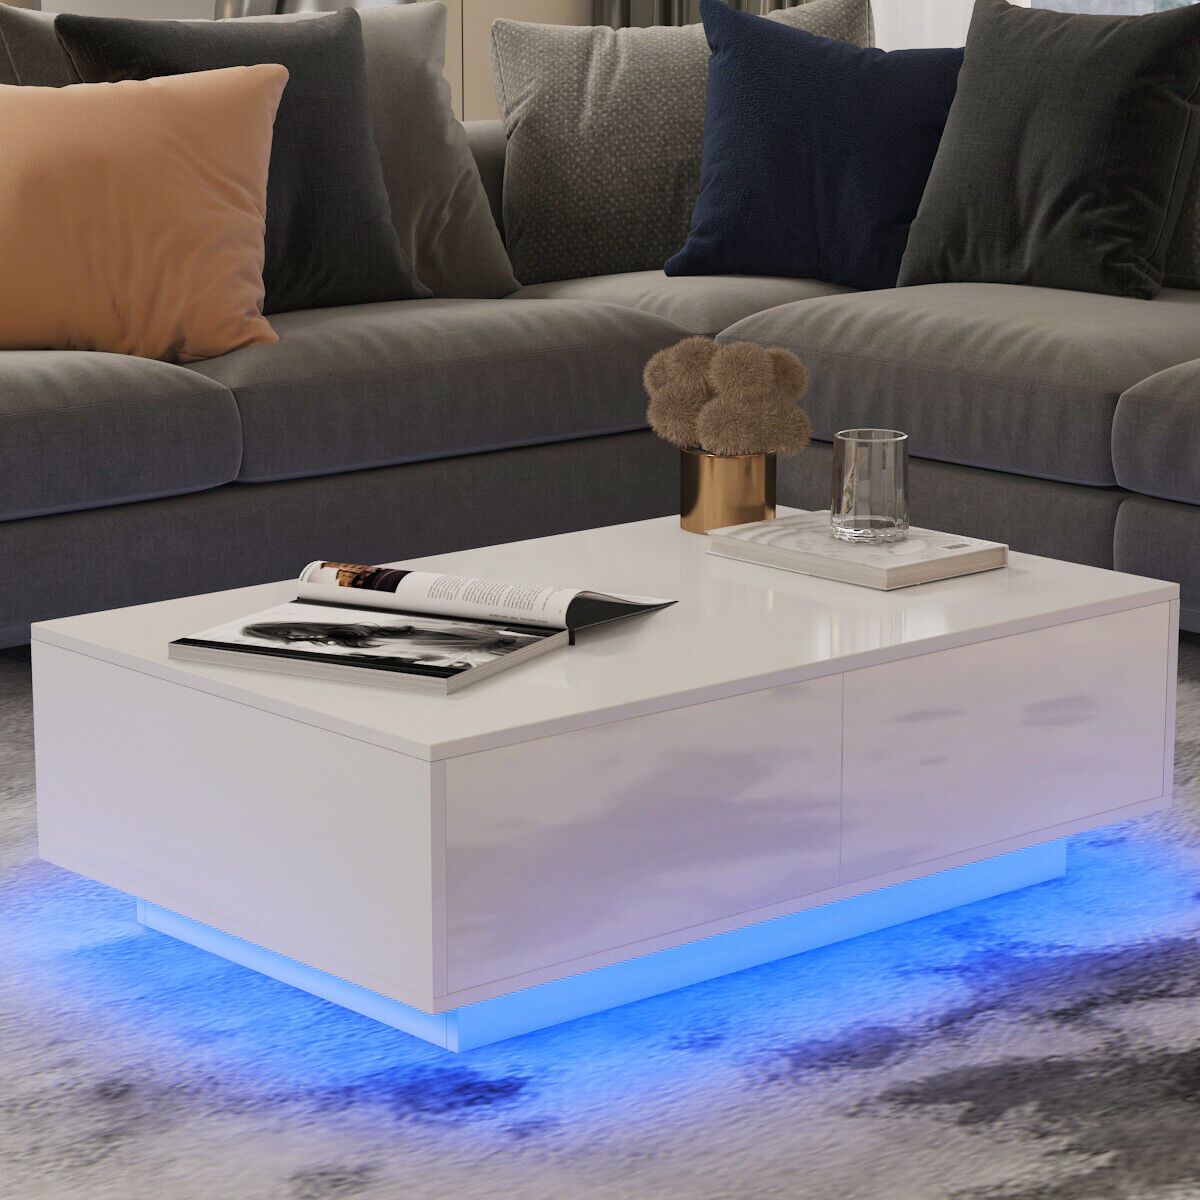 Led Light High Gloss Coffee Table With 4 Drawers Storage Living Room End  Table | Ebay Intended For Led Coffee Tables With 4 Drawers (View 9 of 15)